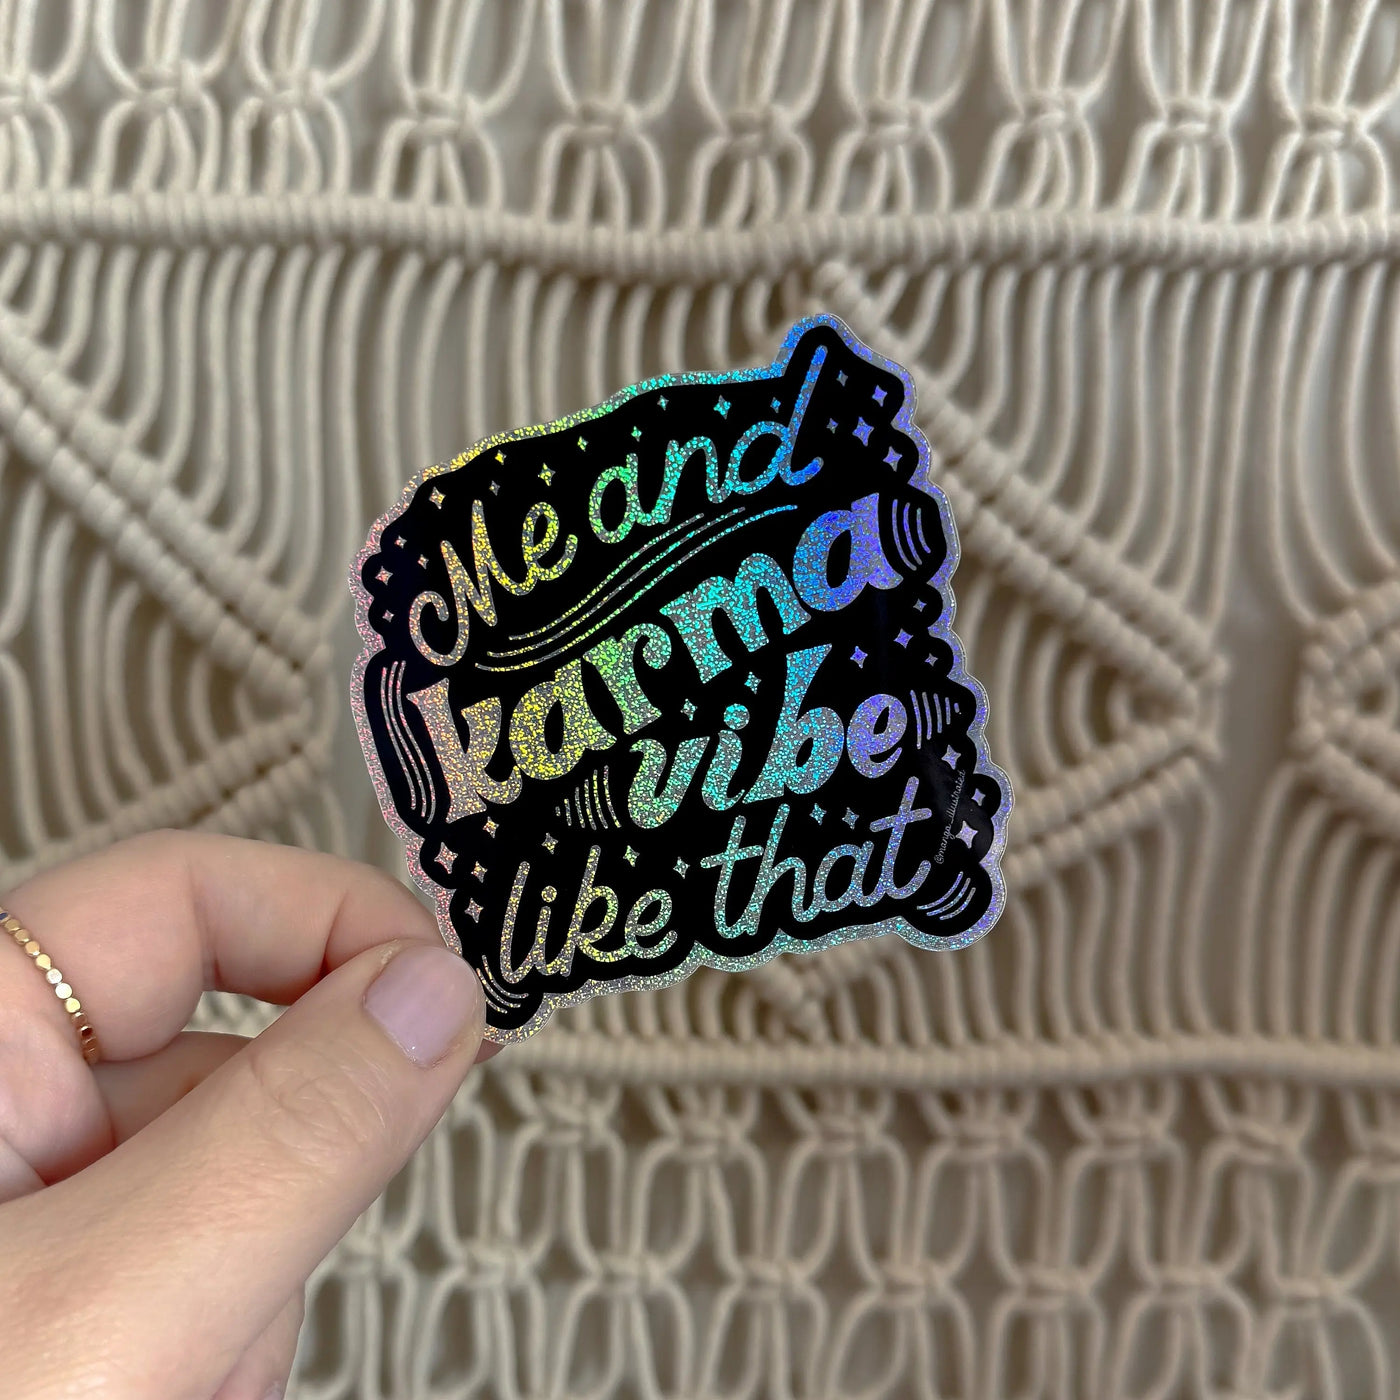 Me and Karma Vibe Like That holographic glitter sticker MangoIllustrated